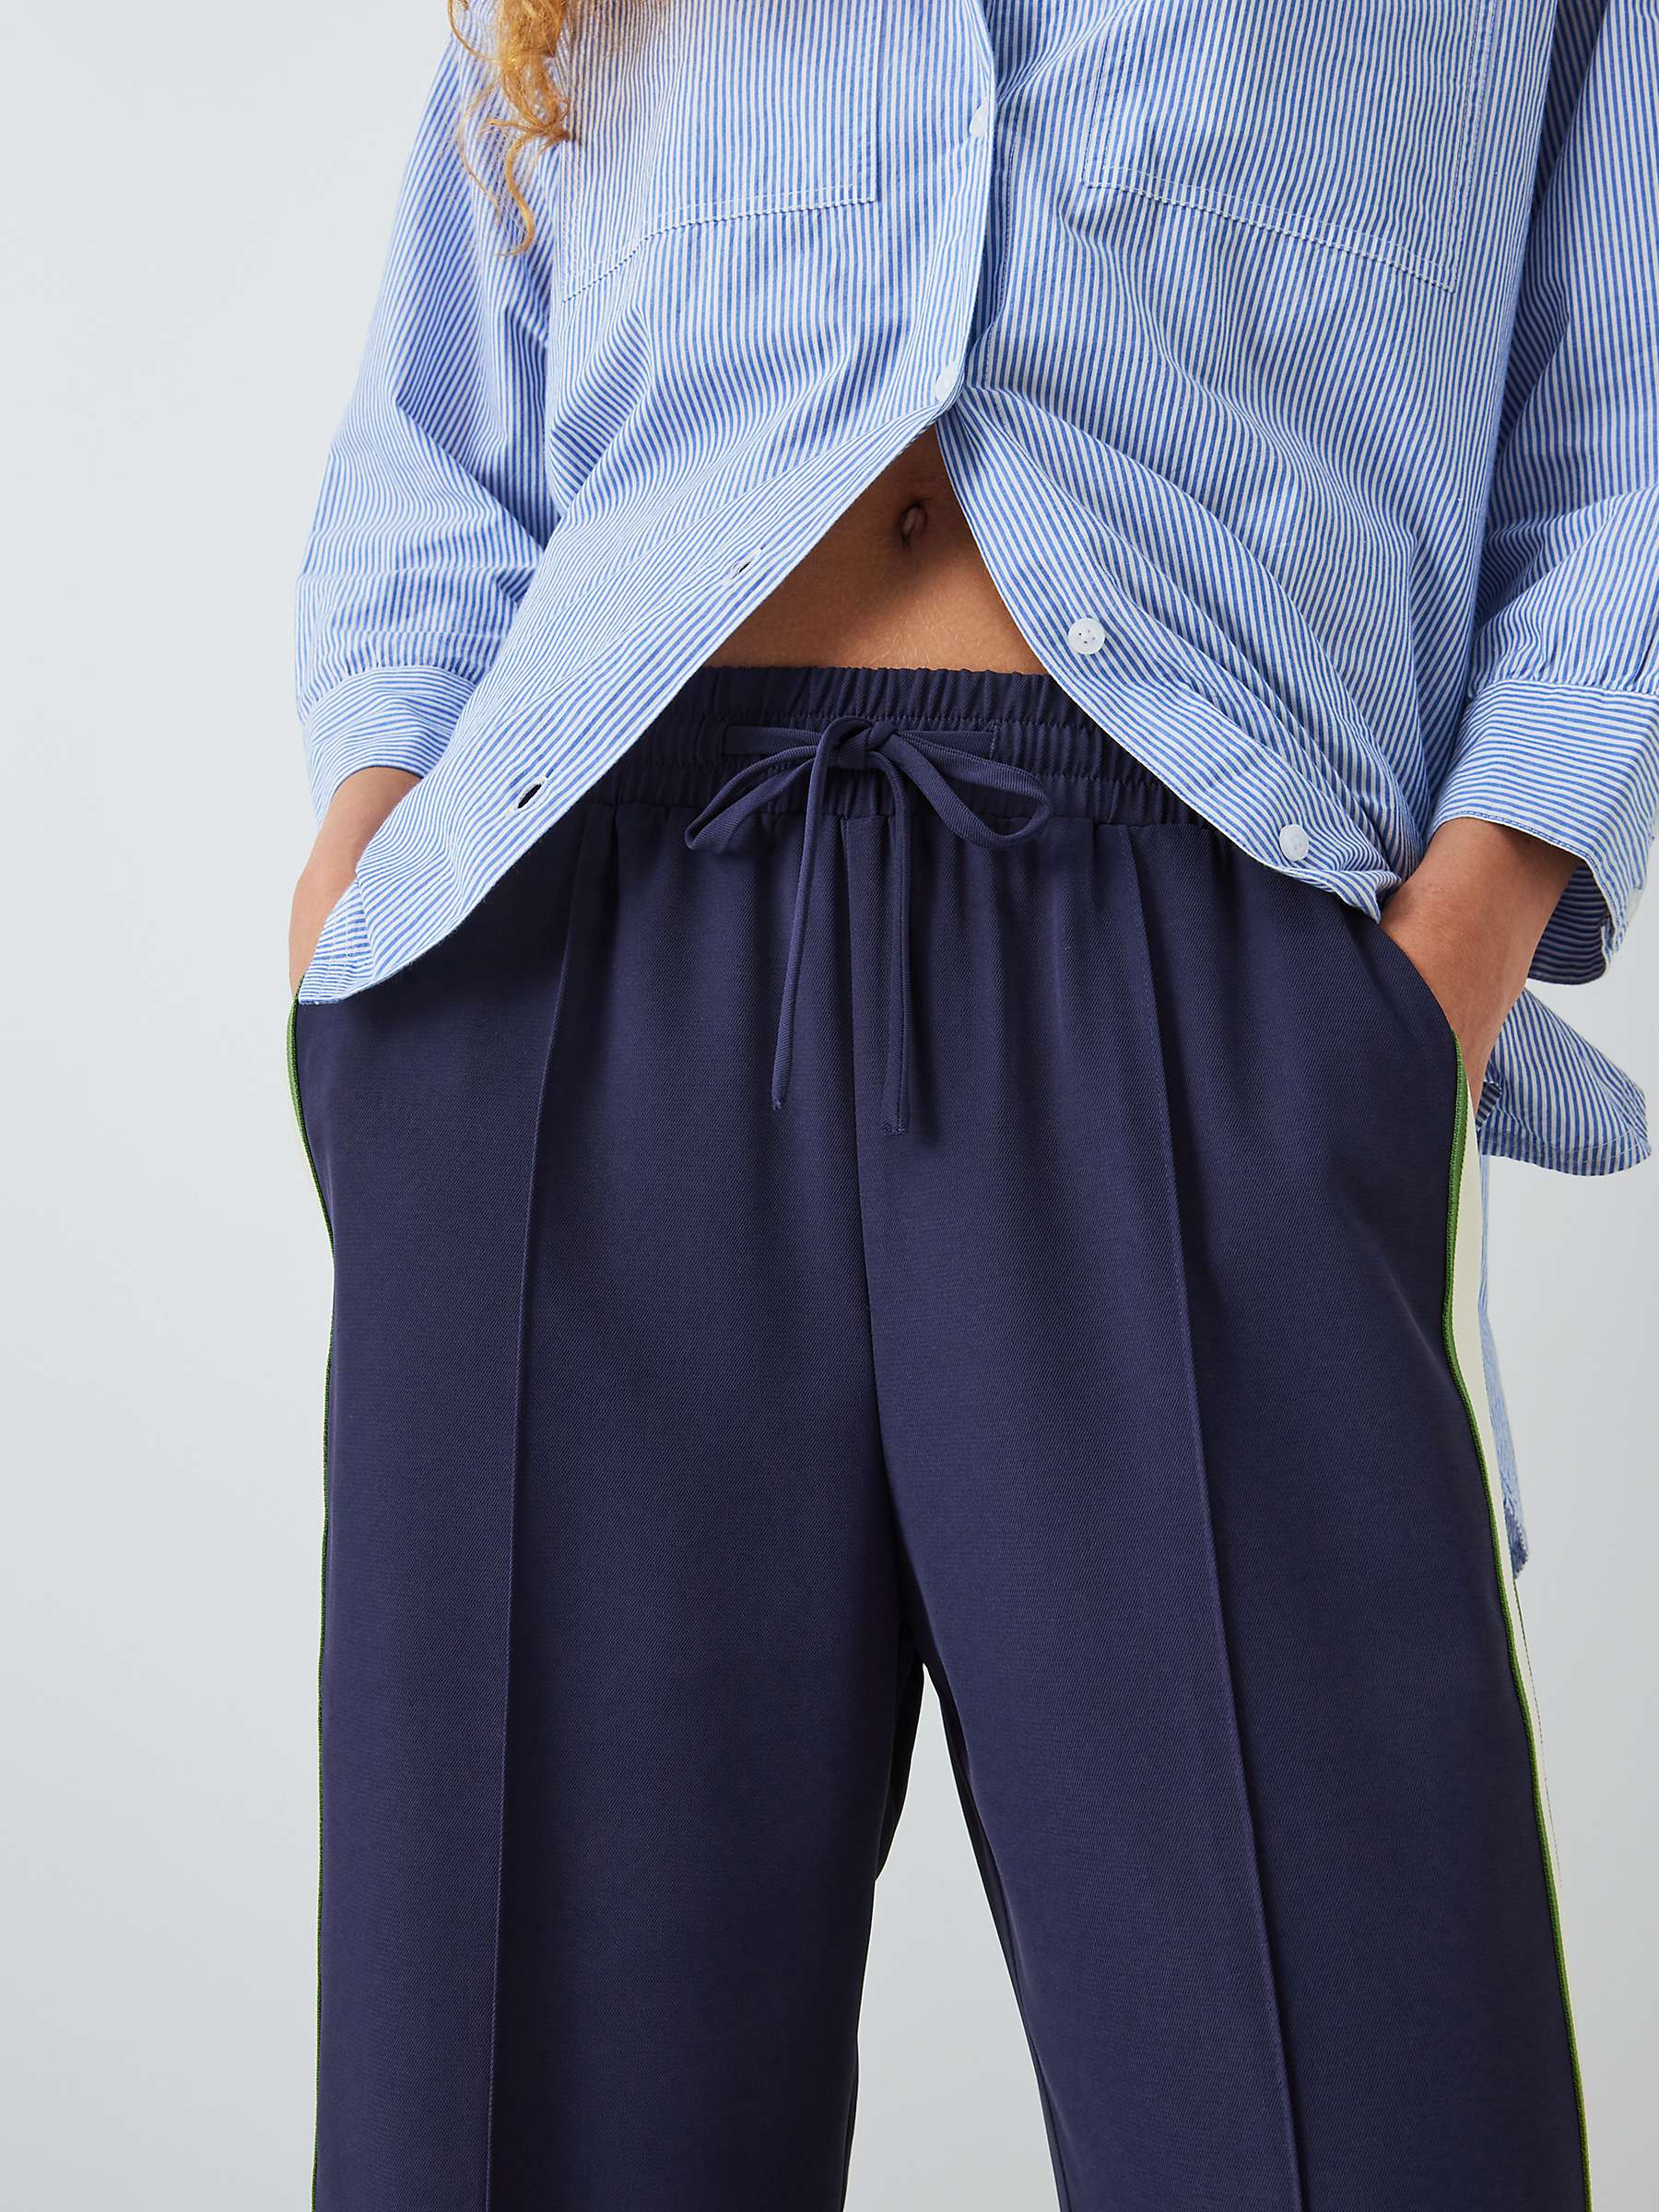 Buy John Lewis ANYDAY Side Stripe Wide Leg Trousers, Navy Online at johnlewis.com